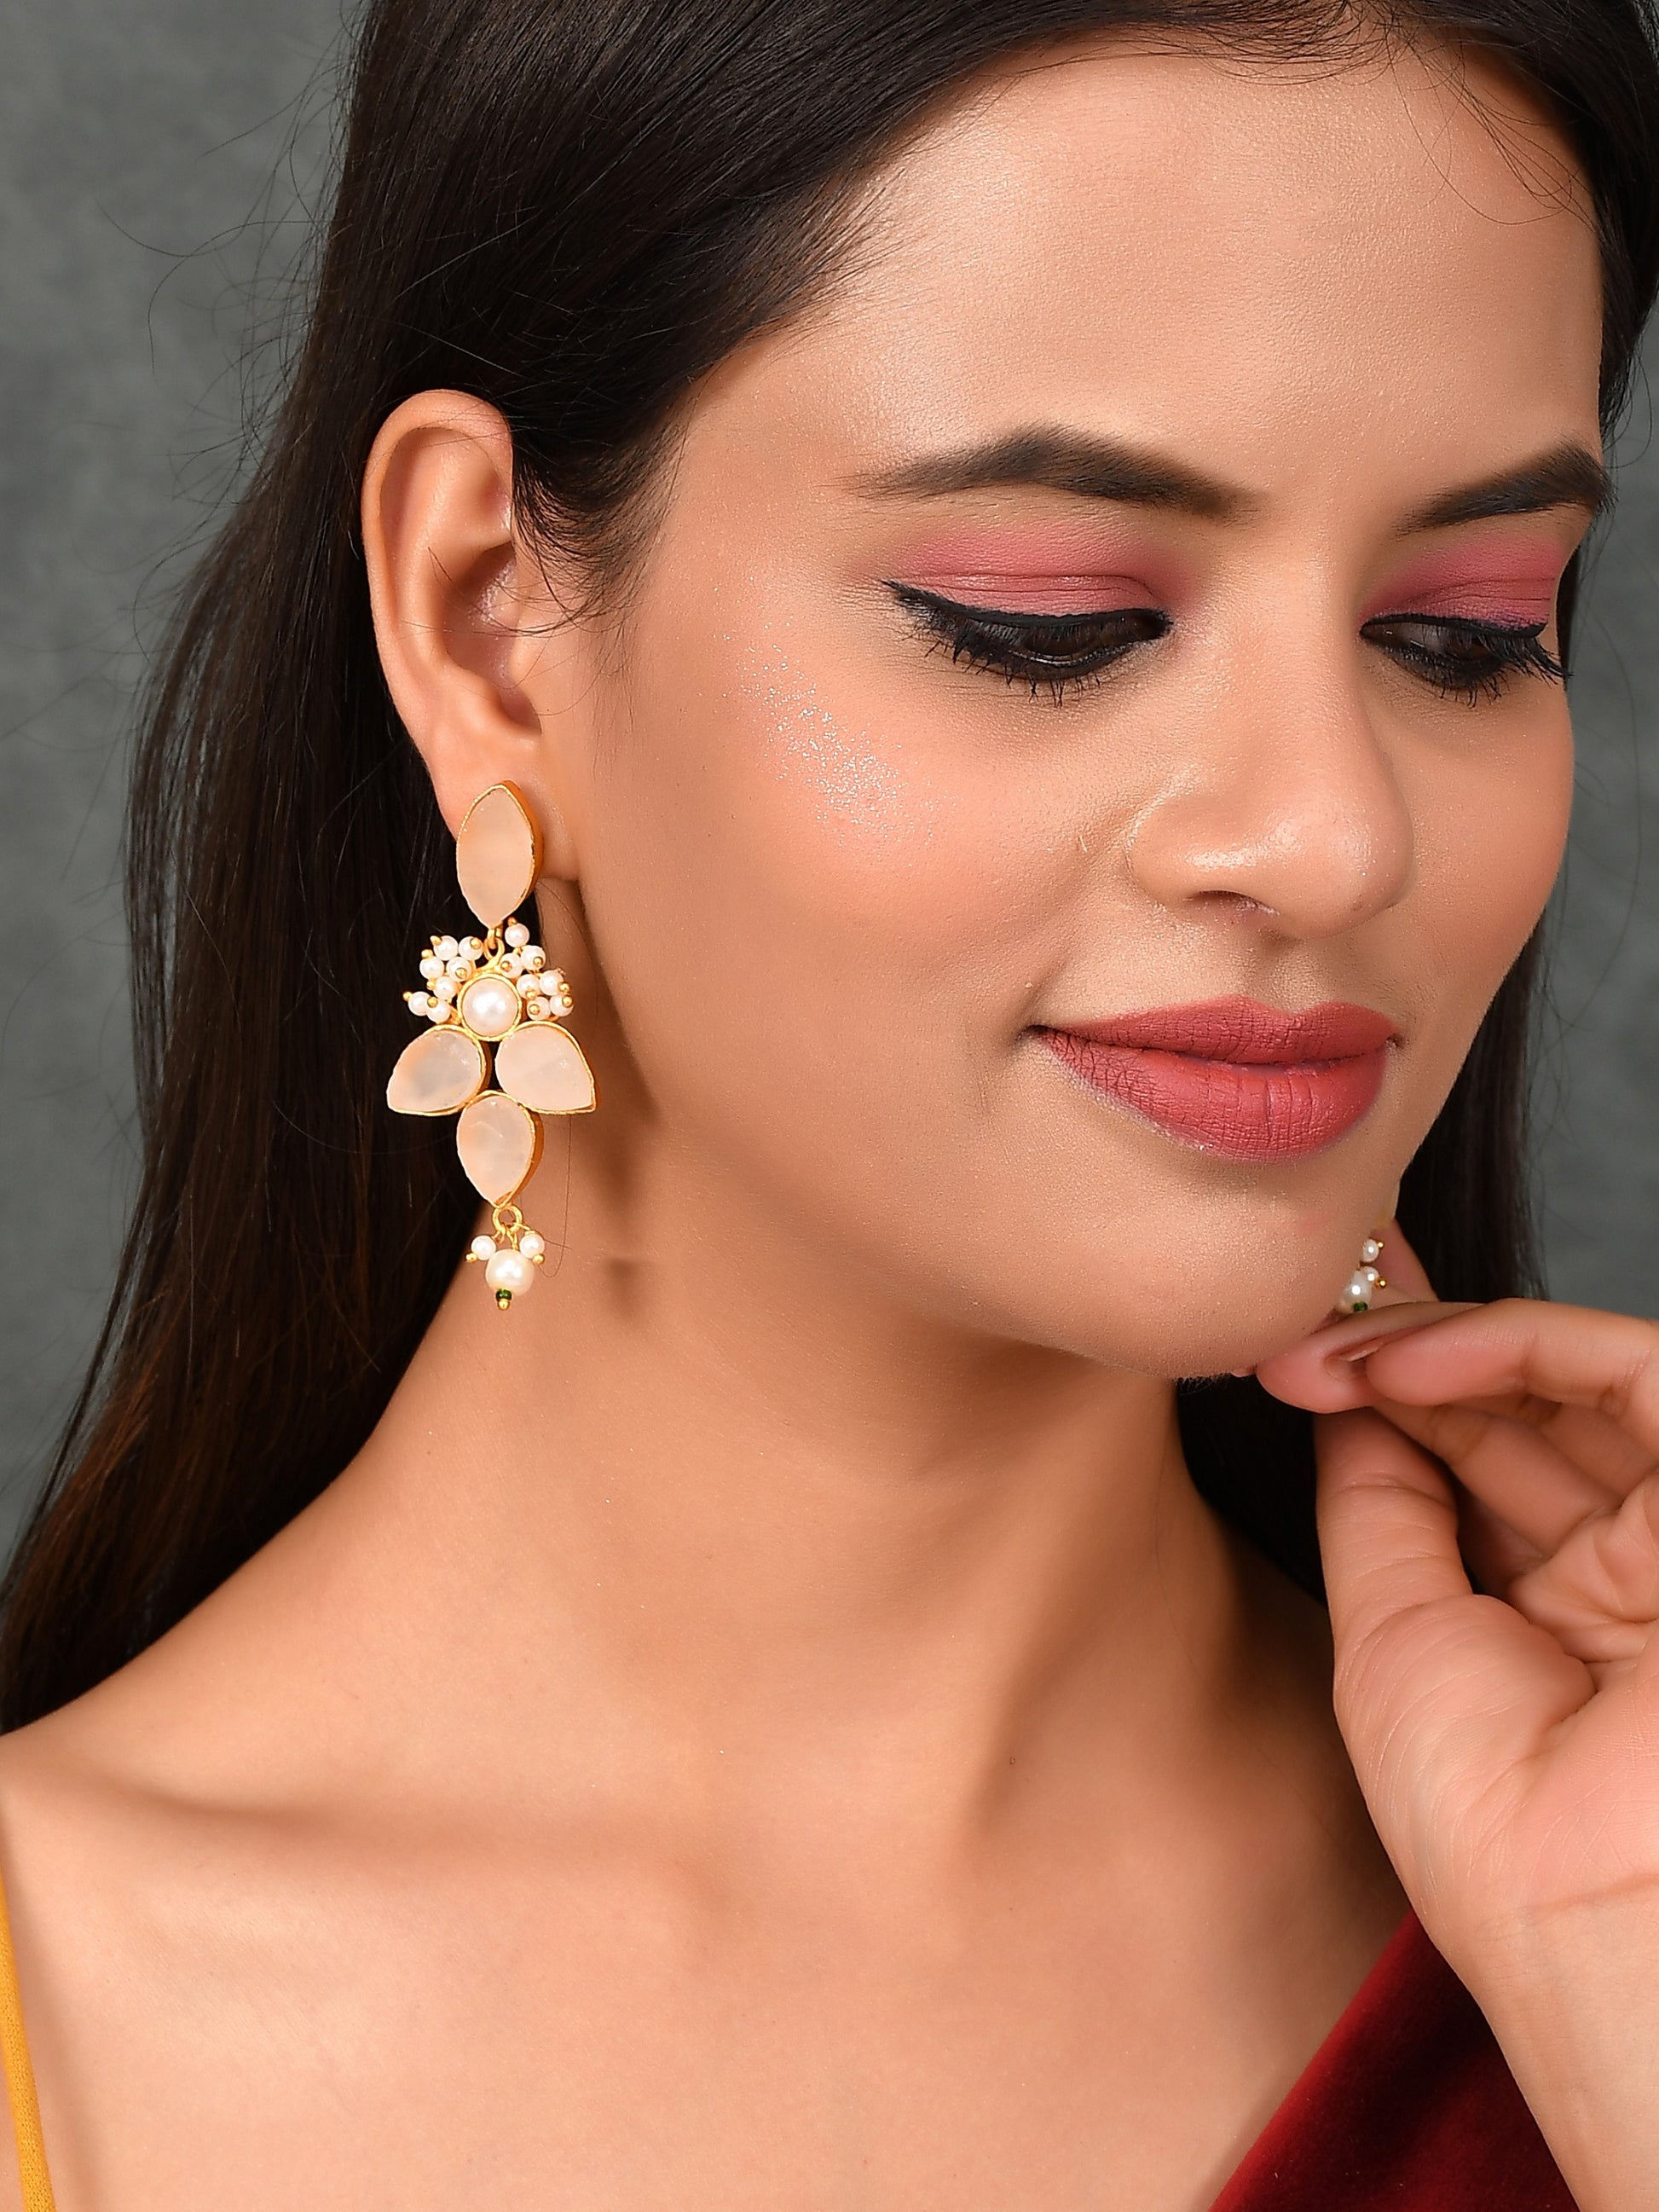 Gold Plated Handcrafted Traditional Earrings